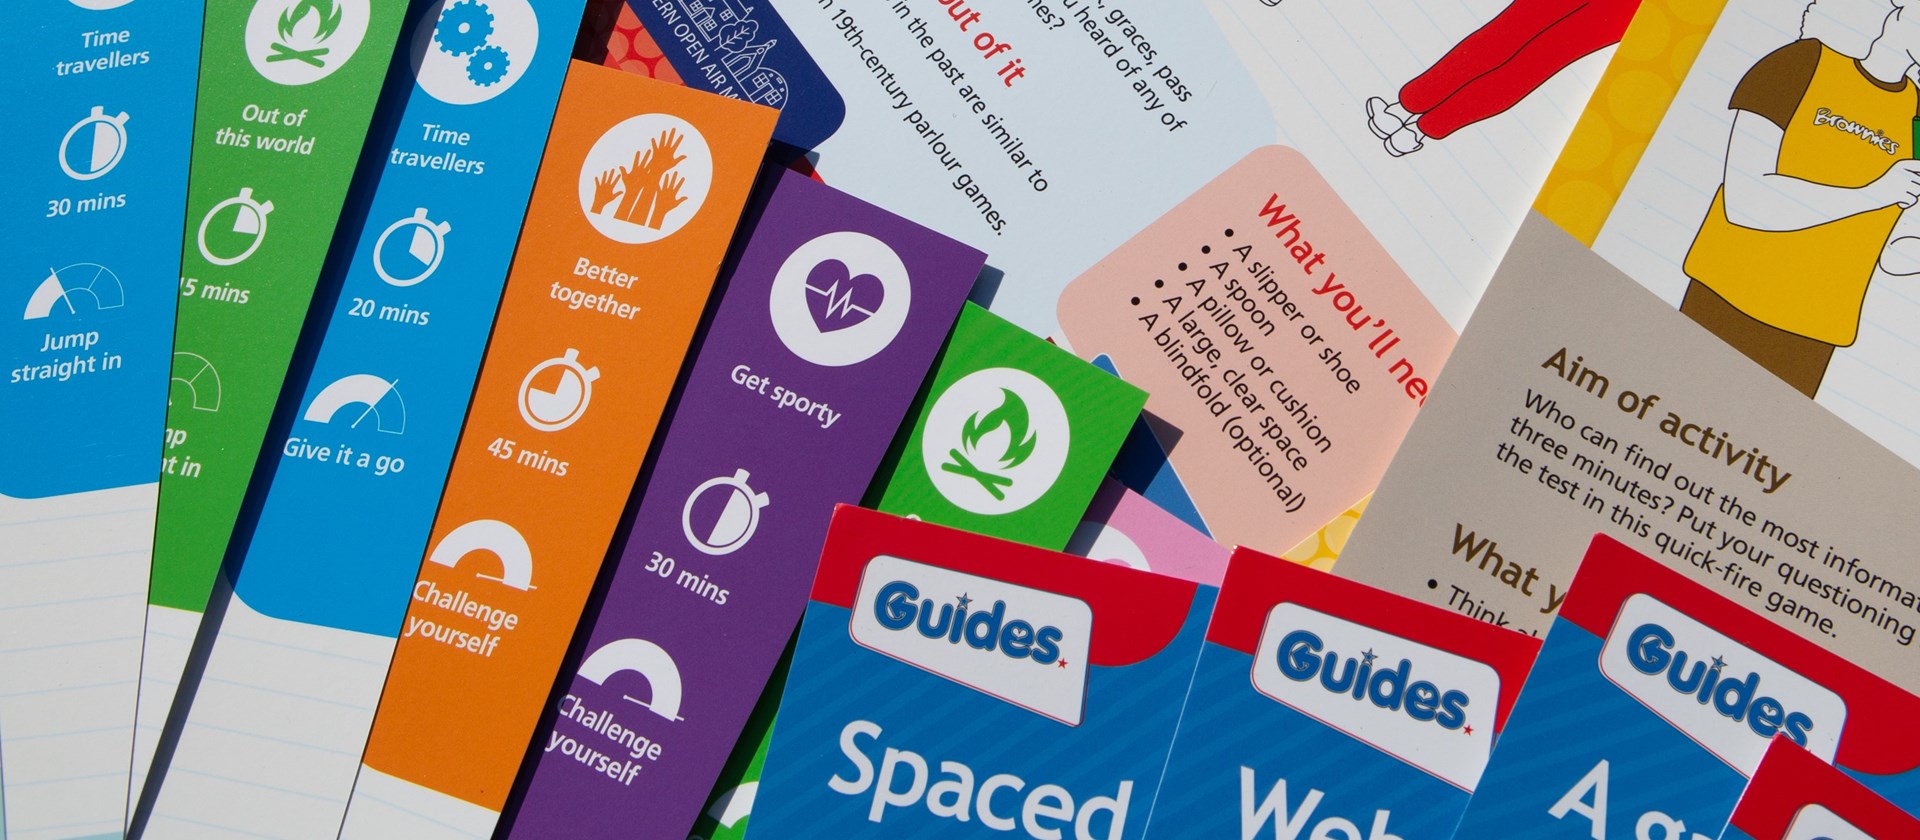 Close up image of Unit meeting activity packs